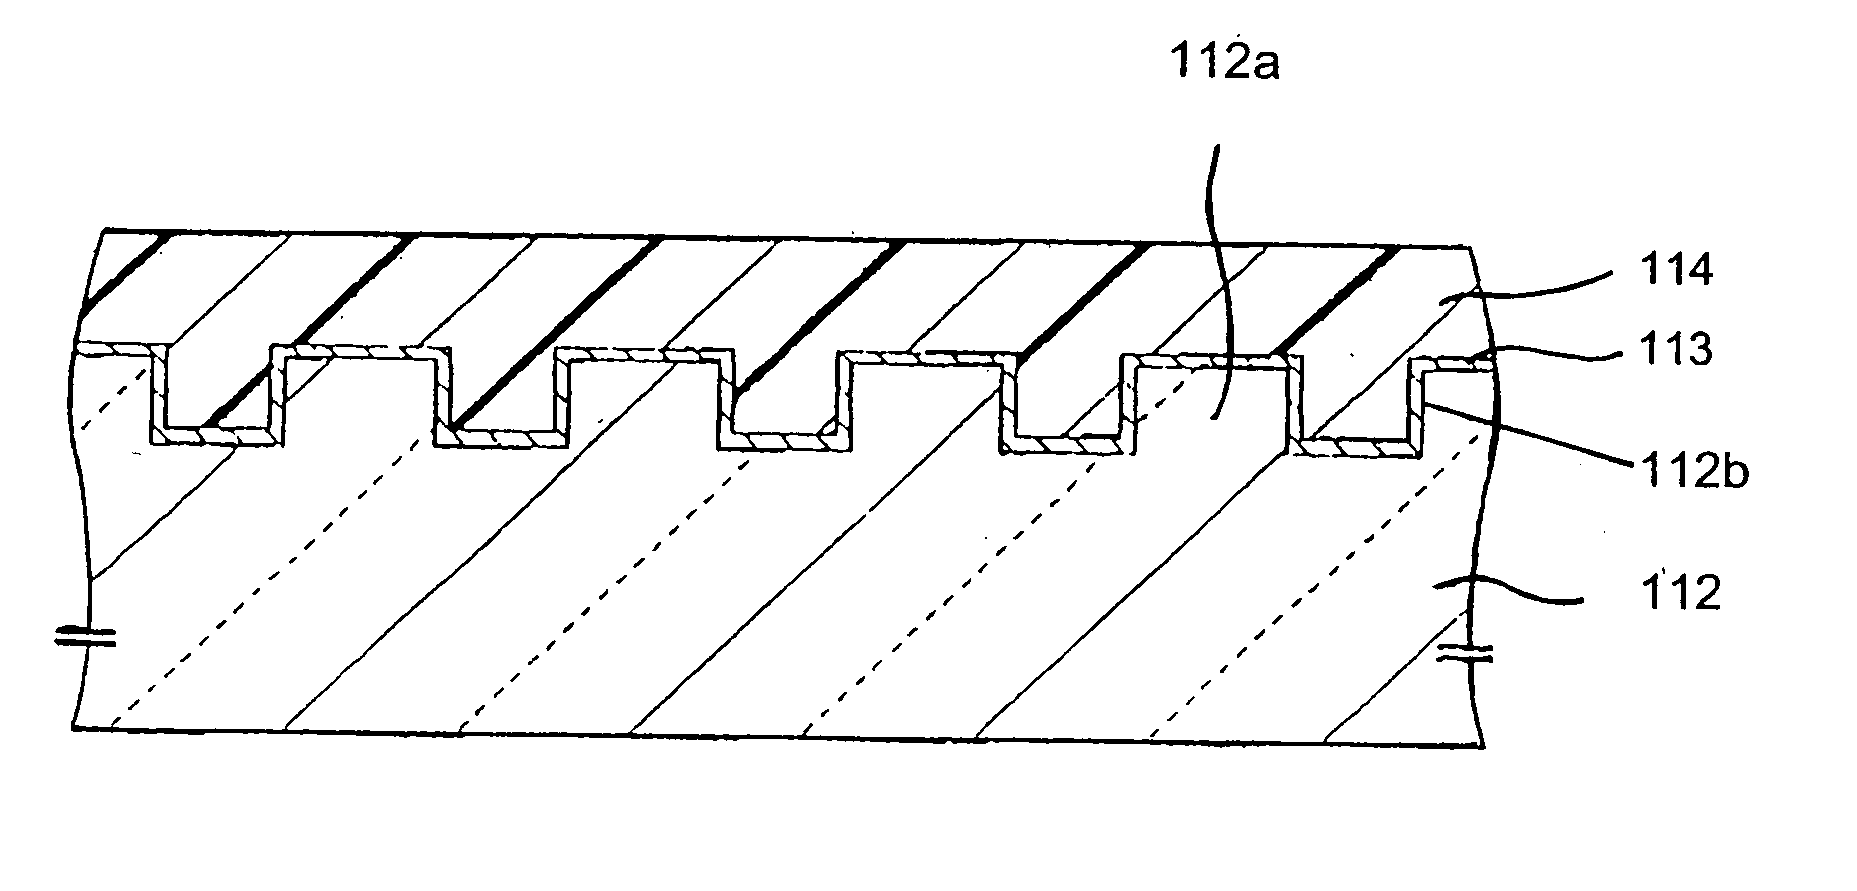 Stamper for producing optical recording medium, optical recording medium, and methods of producing the same